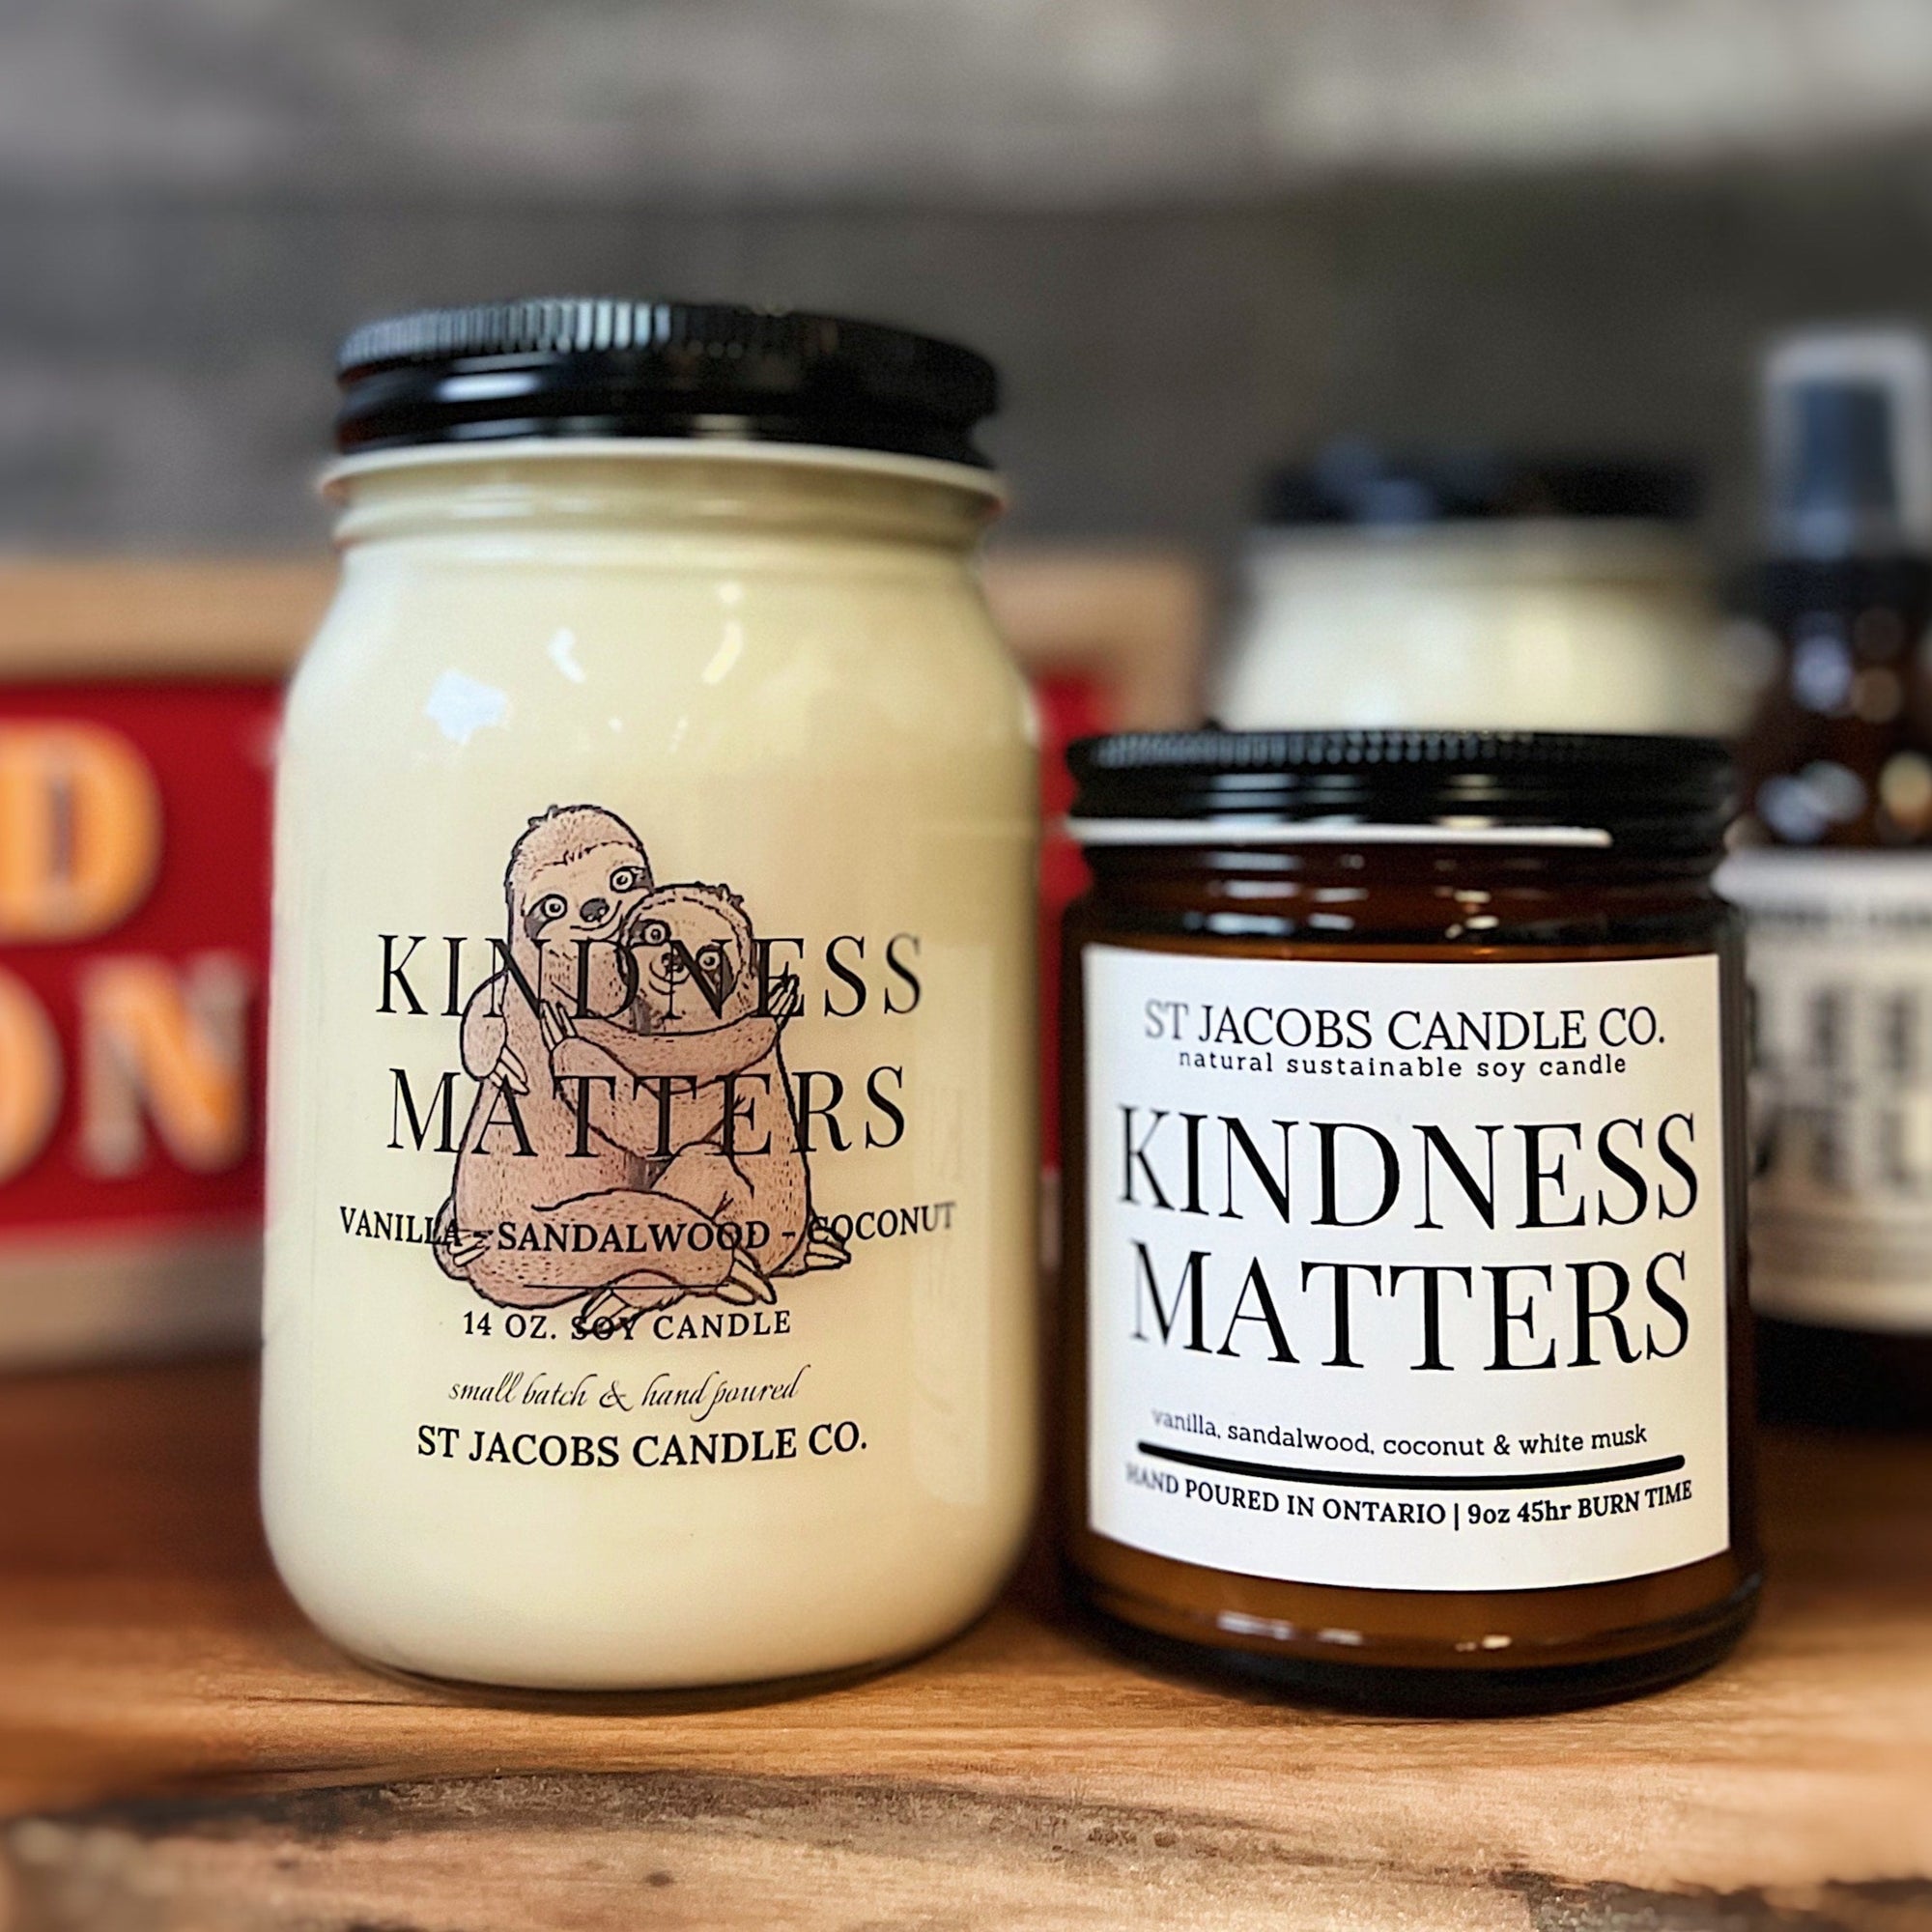 "KINDNESS MATTERS" Natural Soy Candle